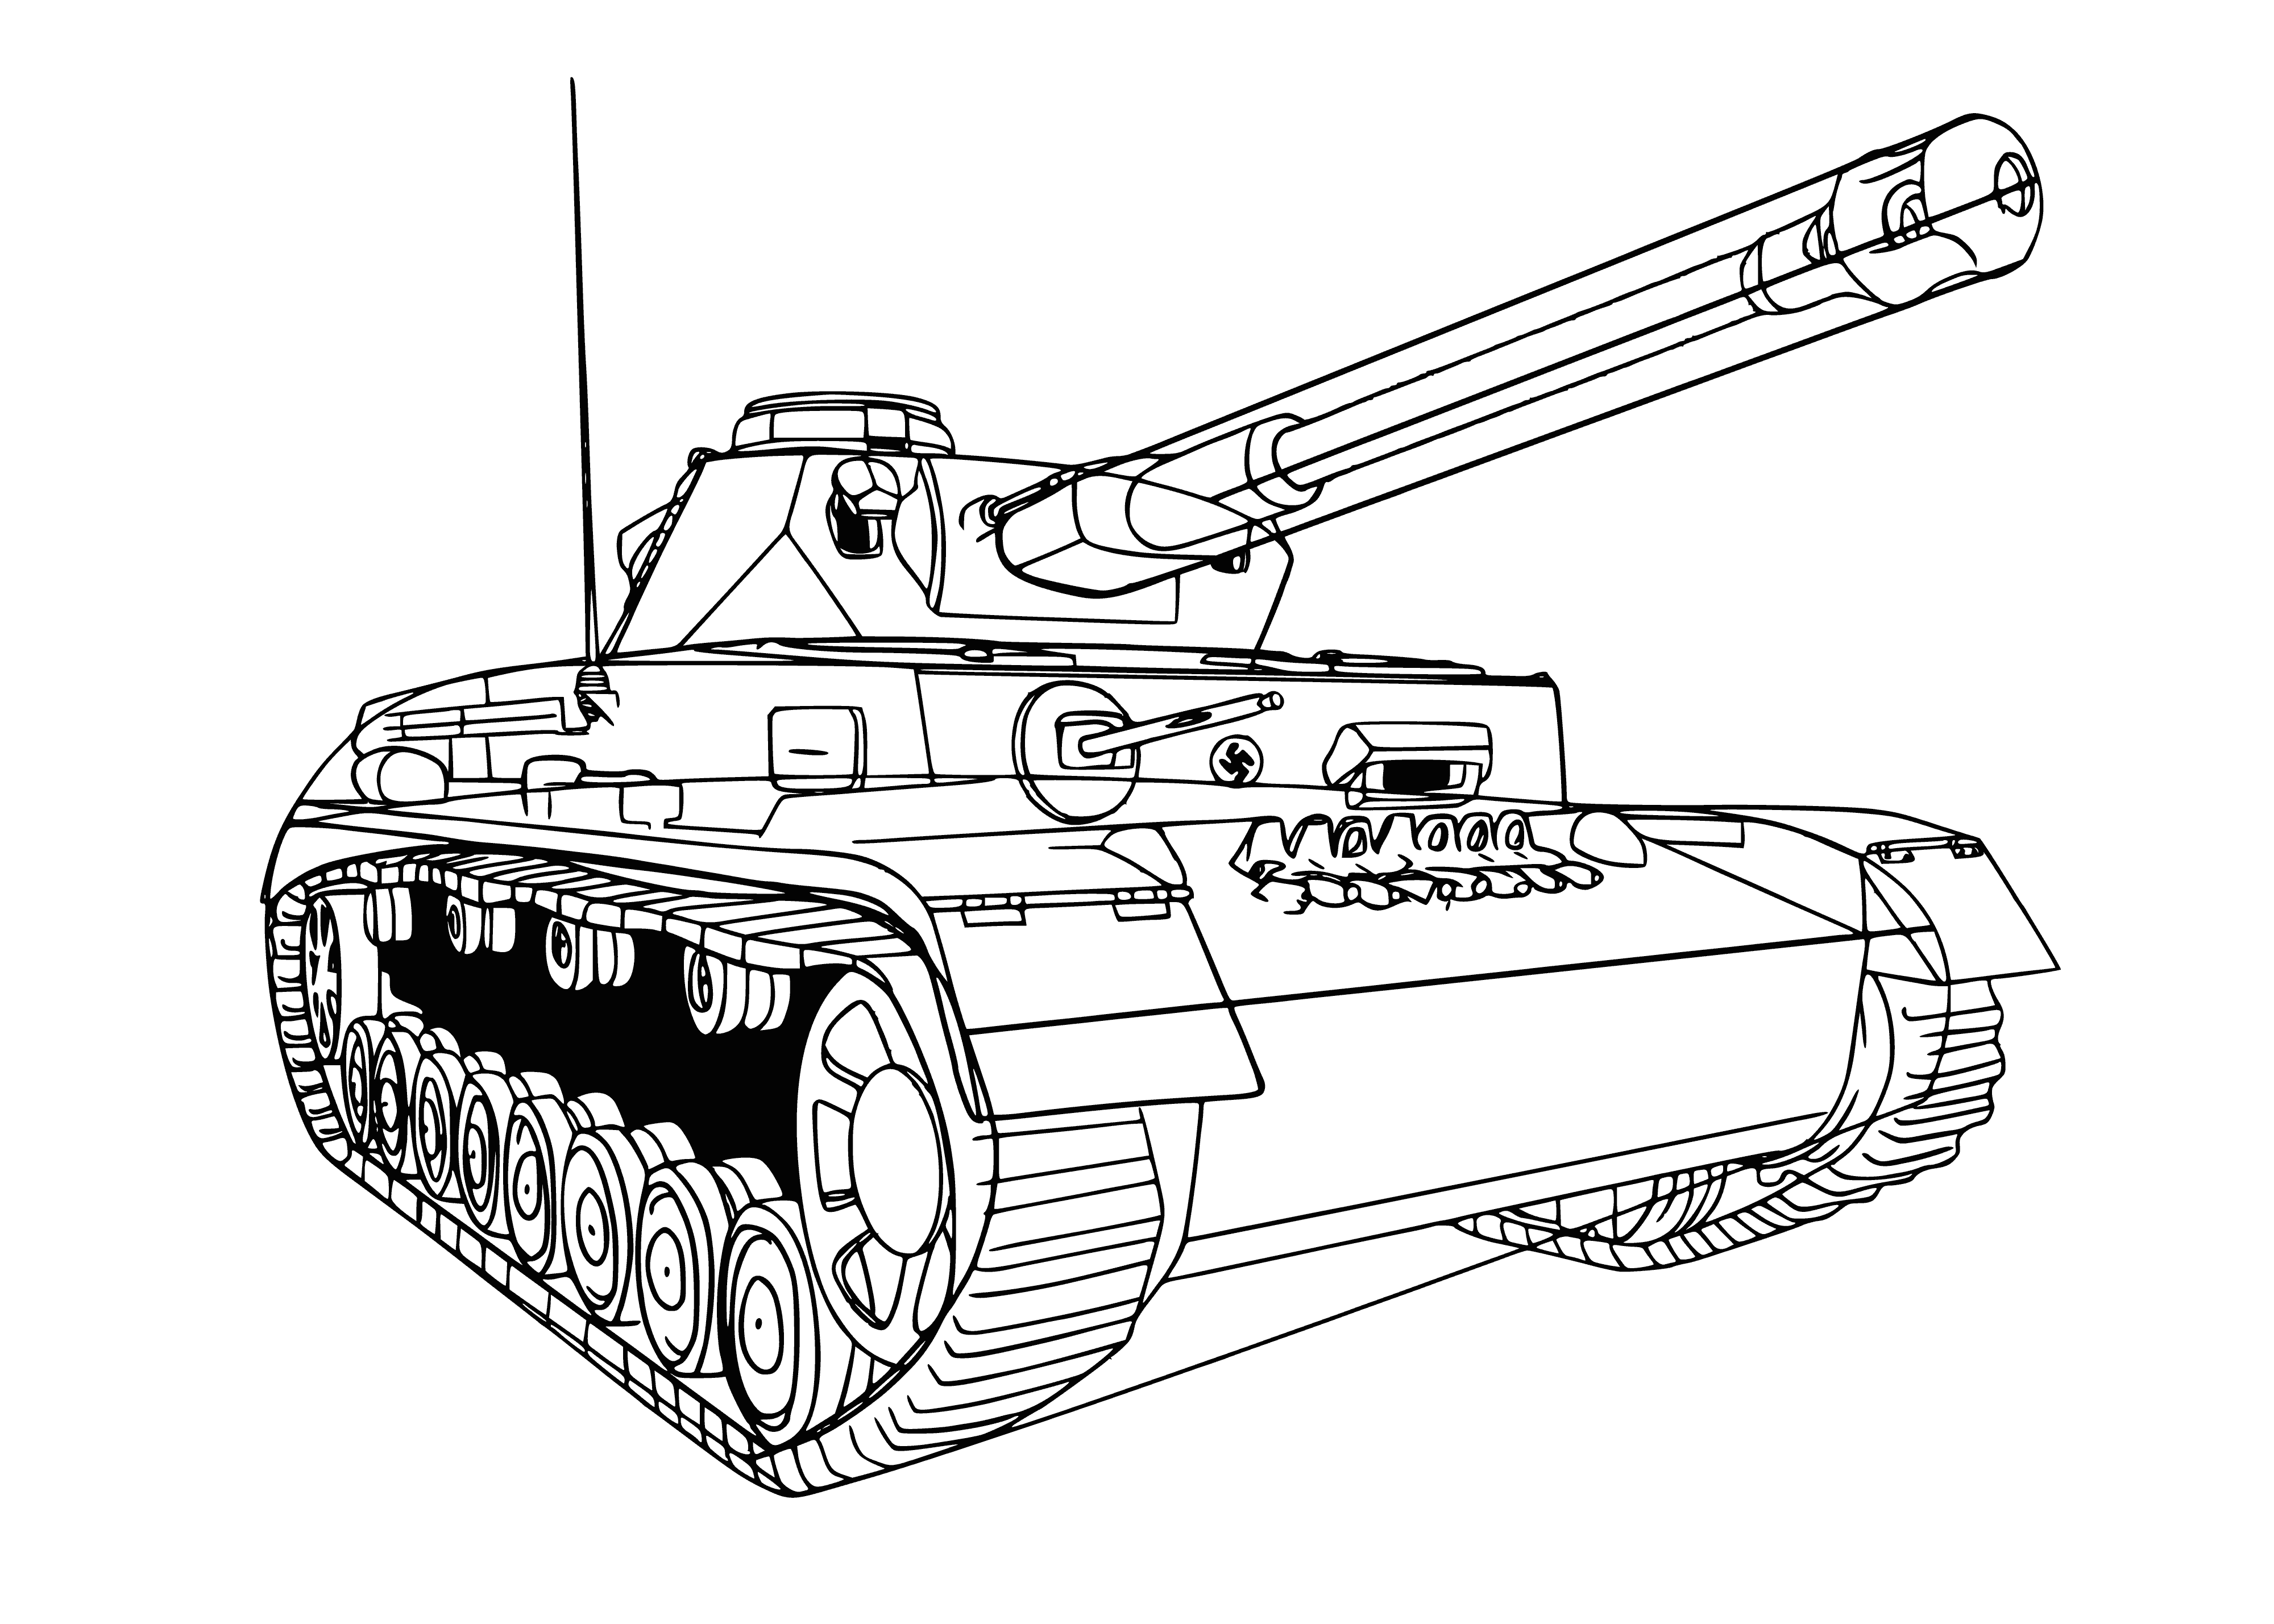 coloring page: Tank drives through muddy field with turret, gun, & armor to protect soldiers from enemy fire. #army #tank